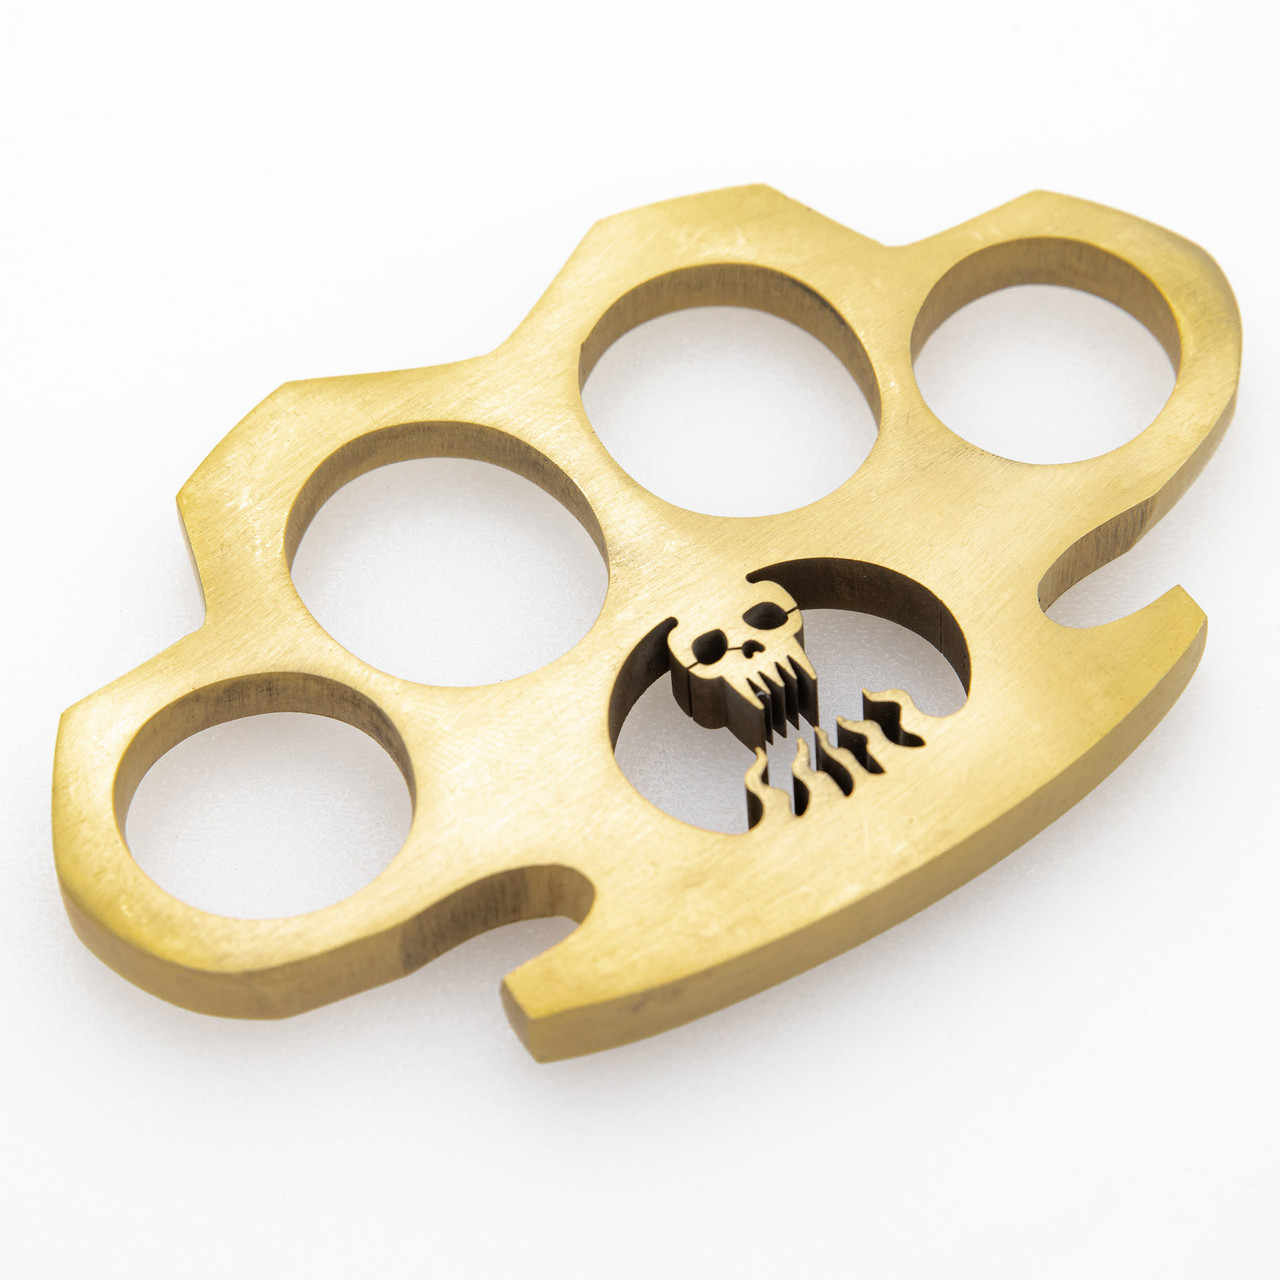 100% Pure Brass Knuckles